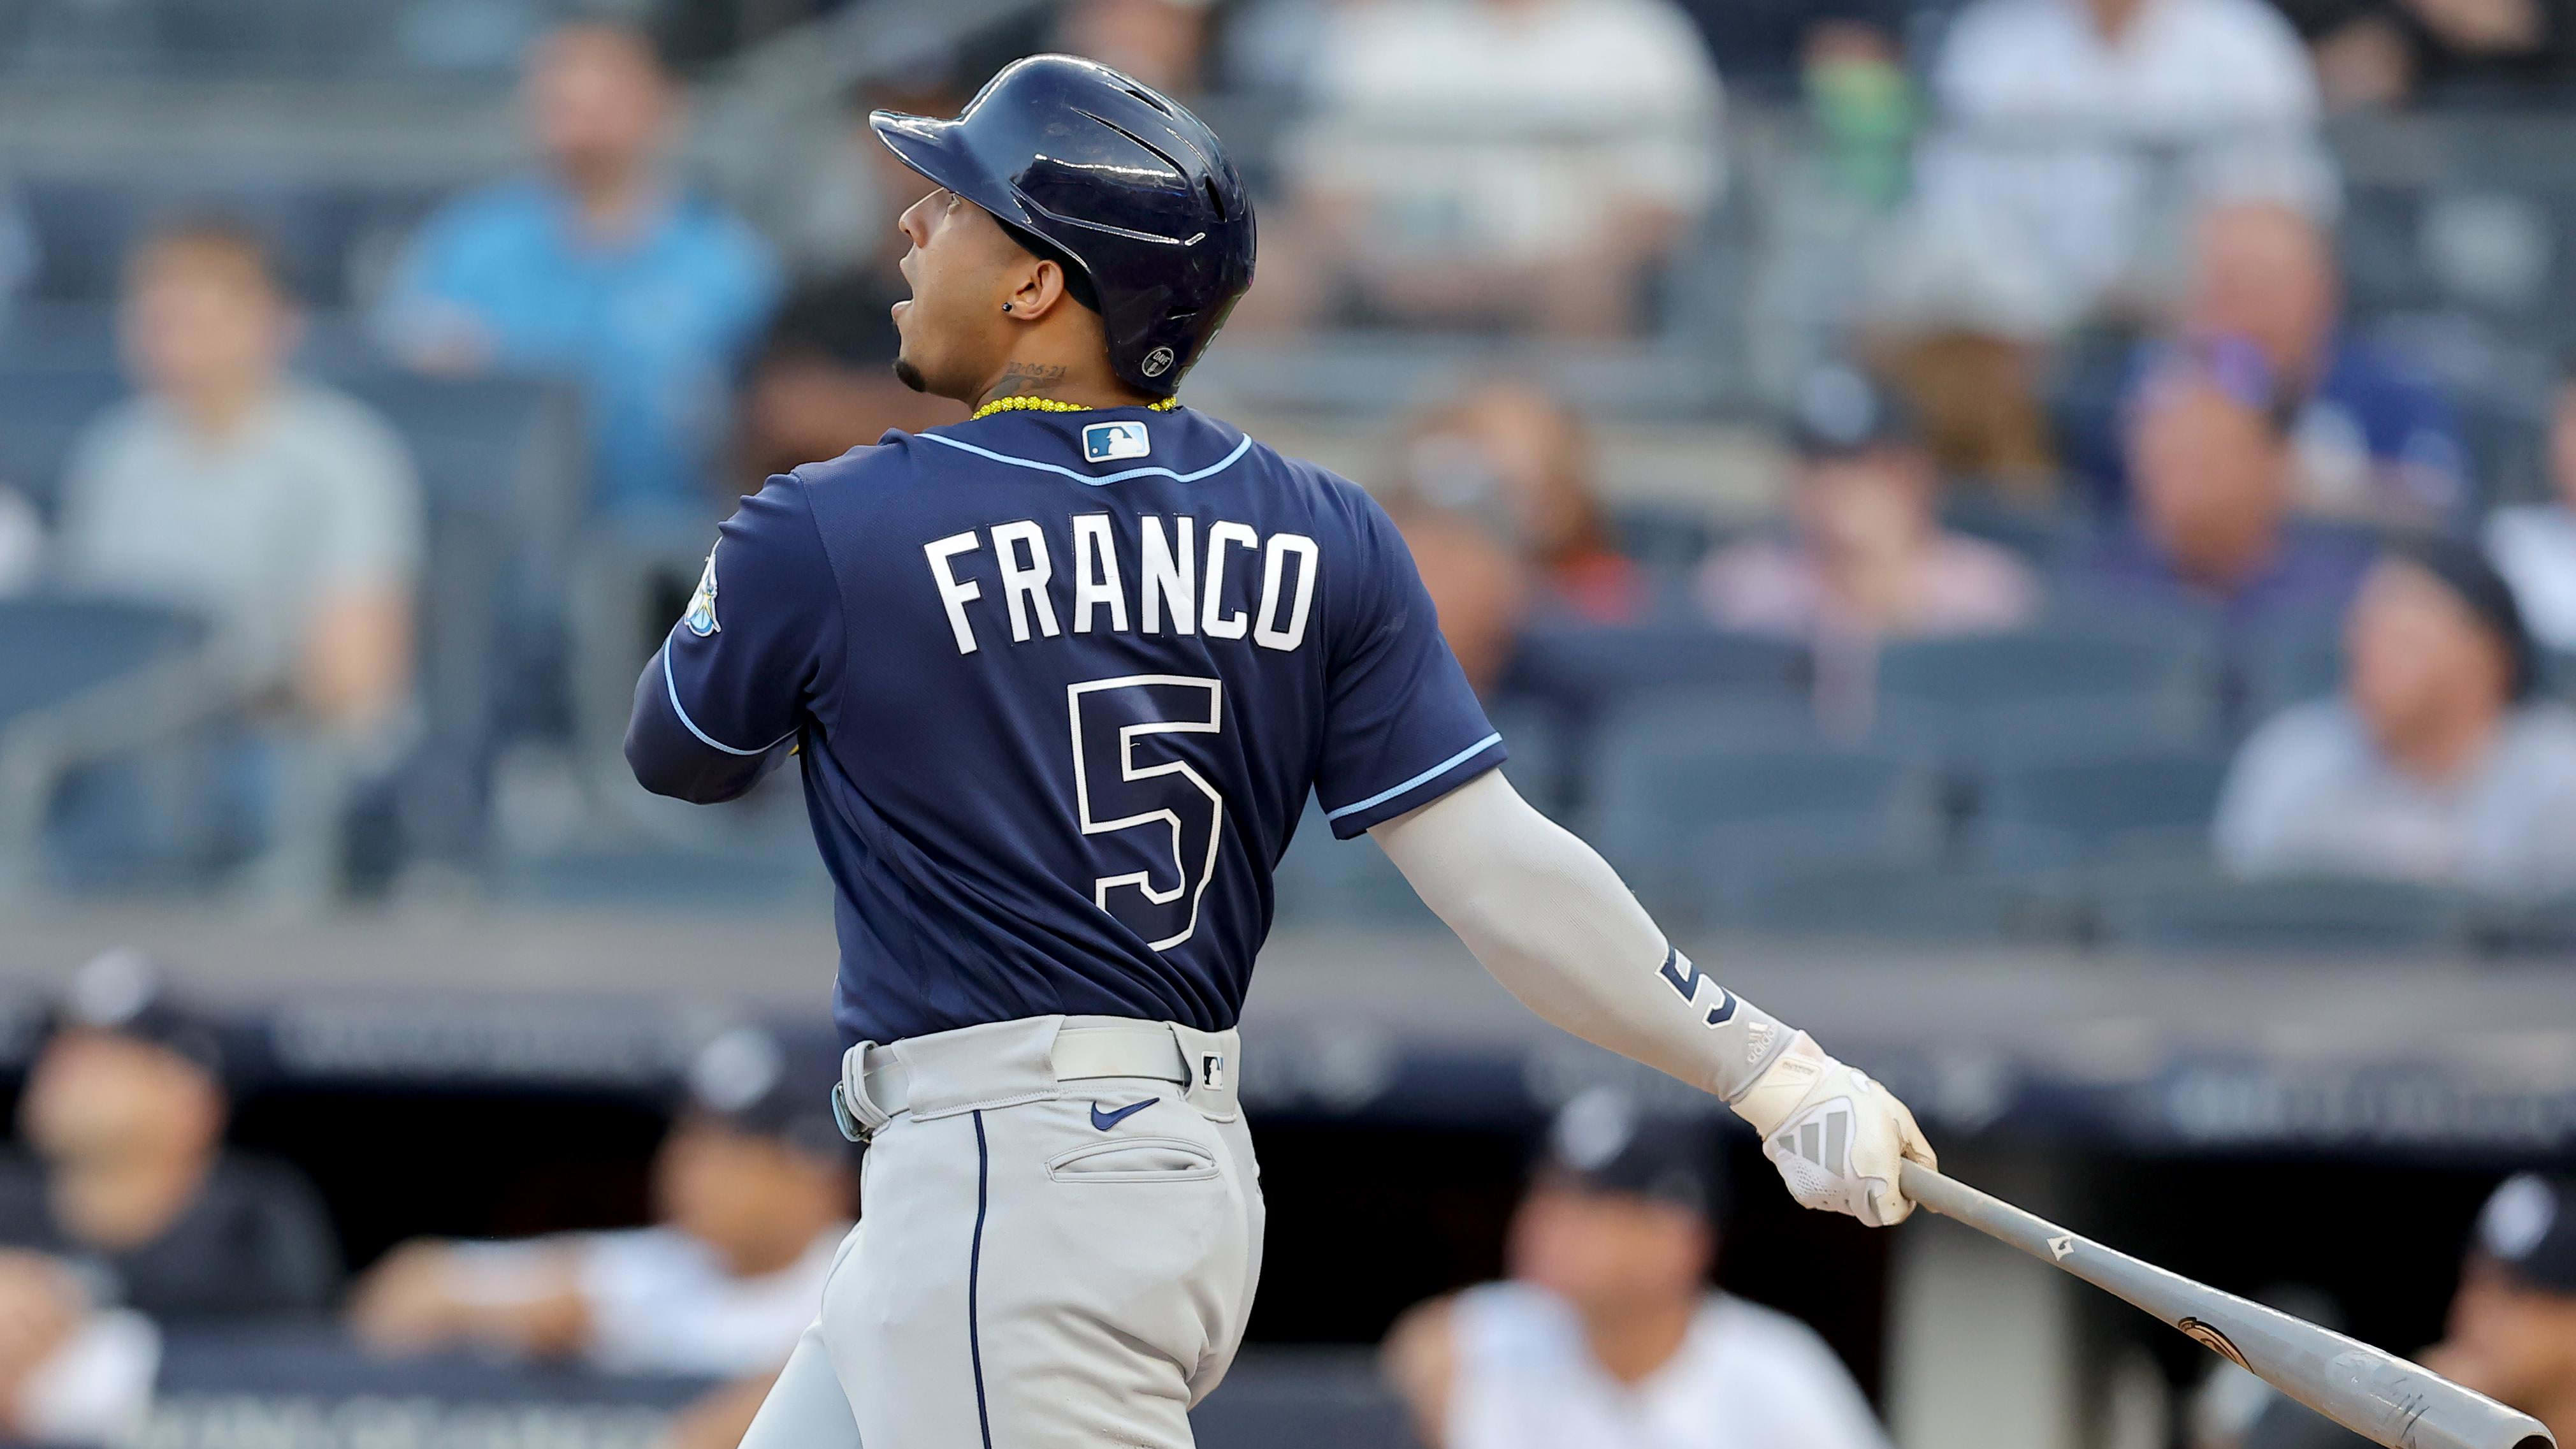 Tampa Bay Rays' Standout Wander Franco to Be Formally Accused of Serious Charge in Dominican Republic